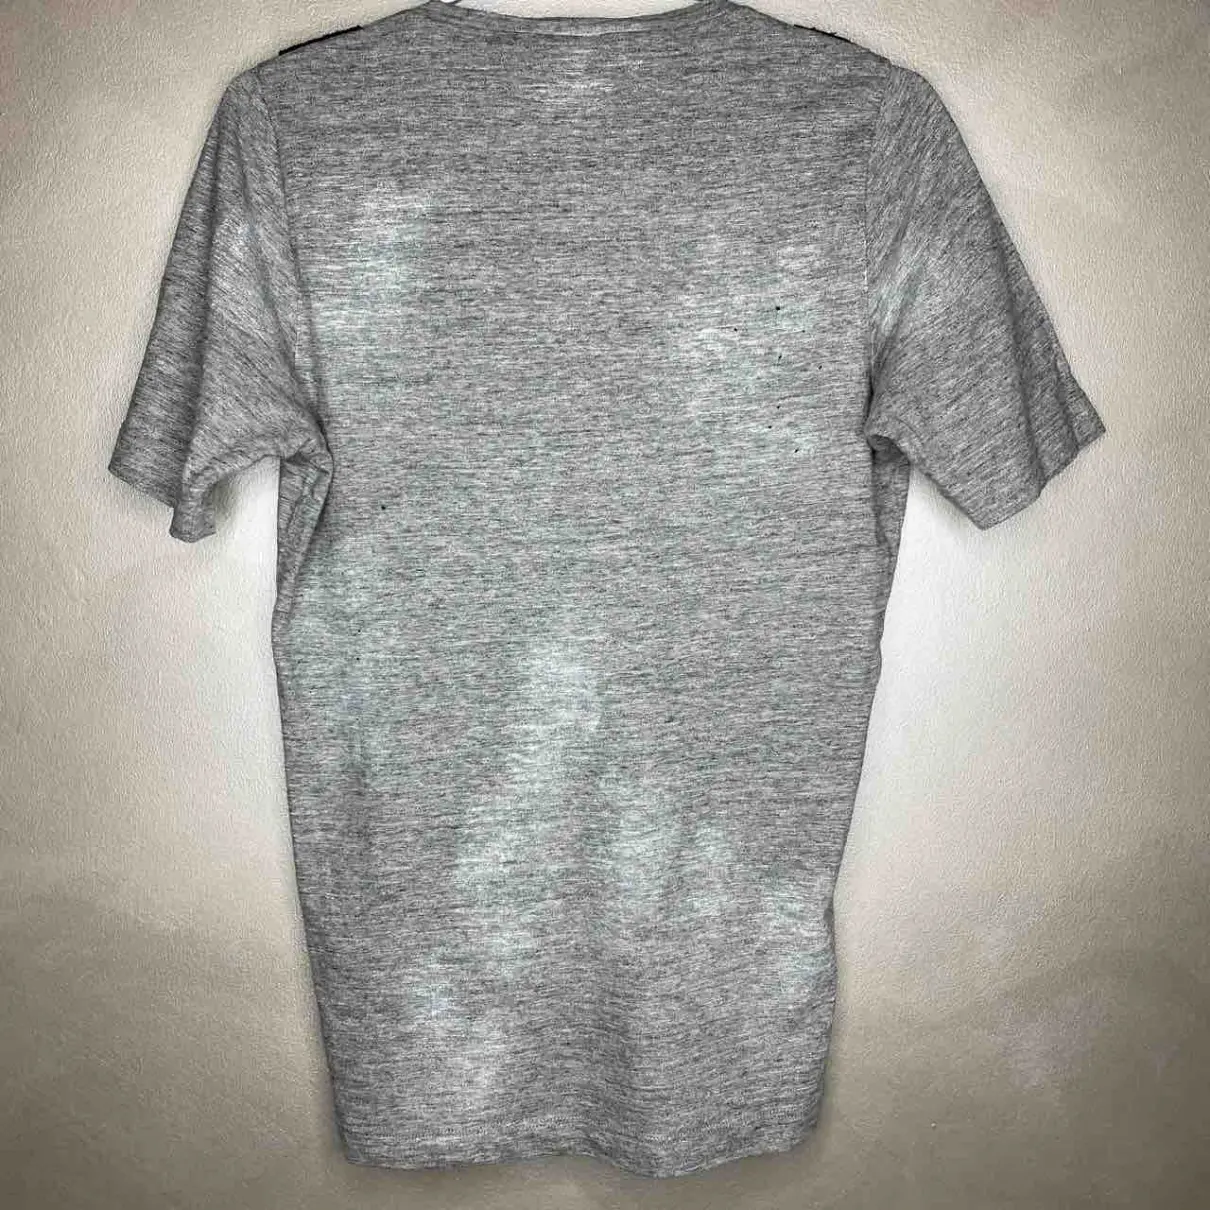 Buy Dsquared2 Grey Cotton Top online